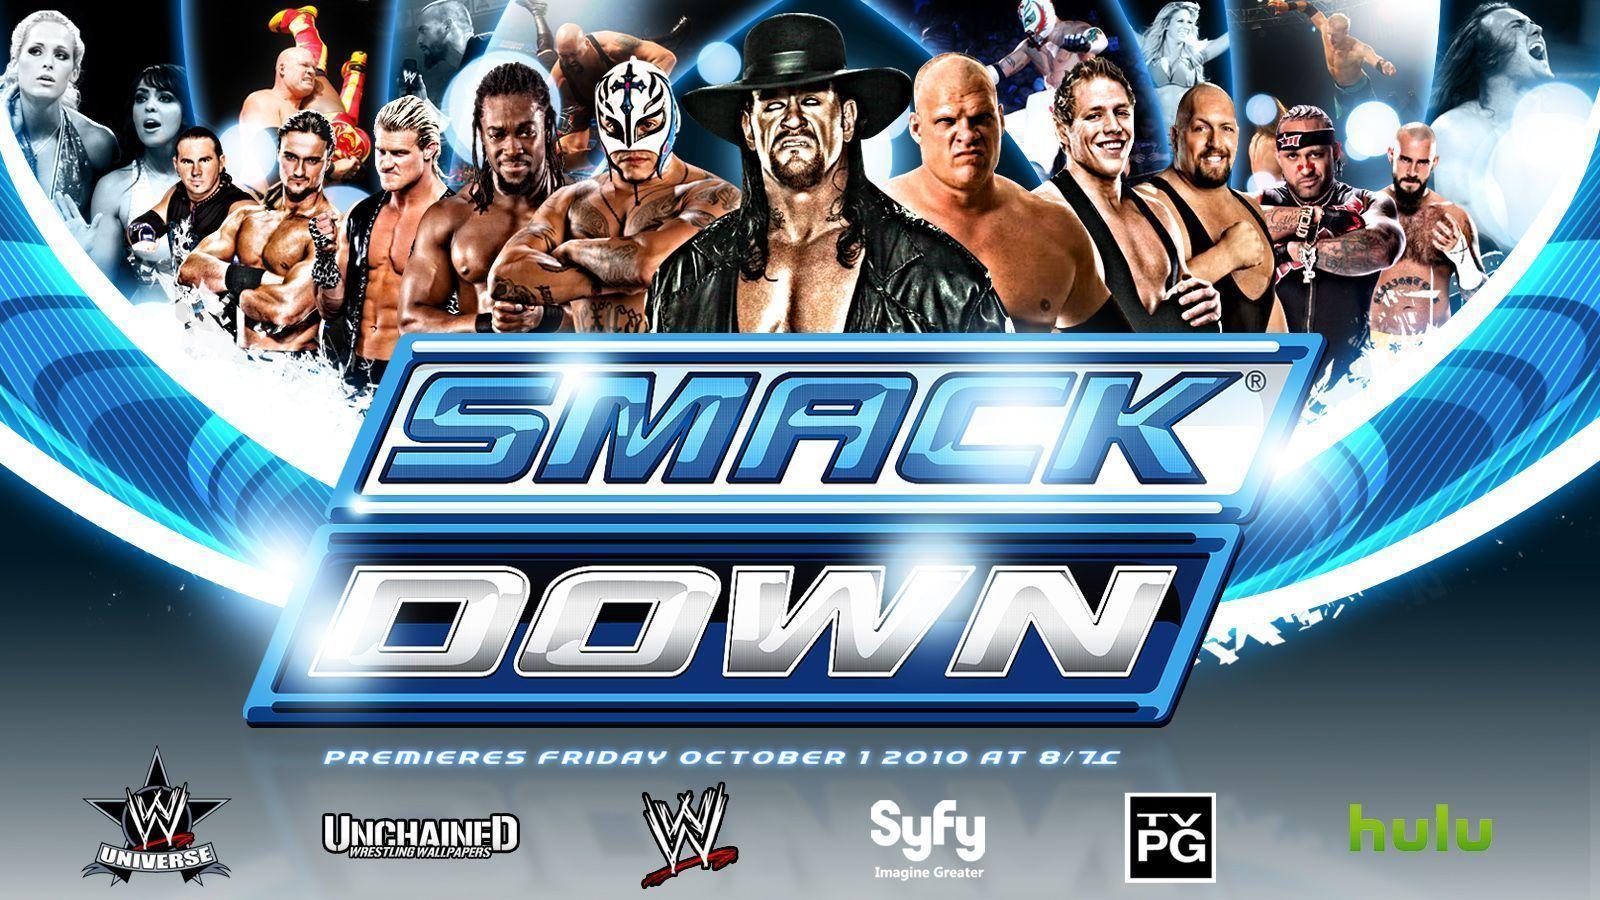 WWE Smackdown Image Hd Download Wallpapers.